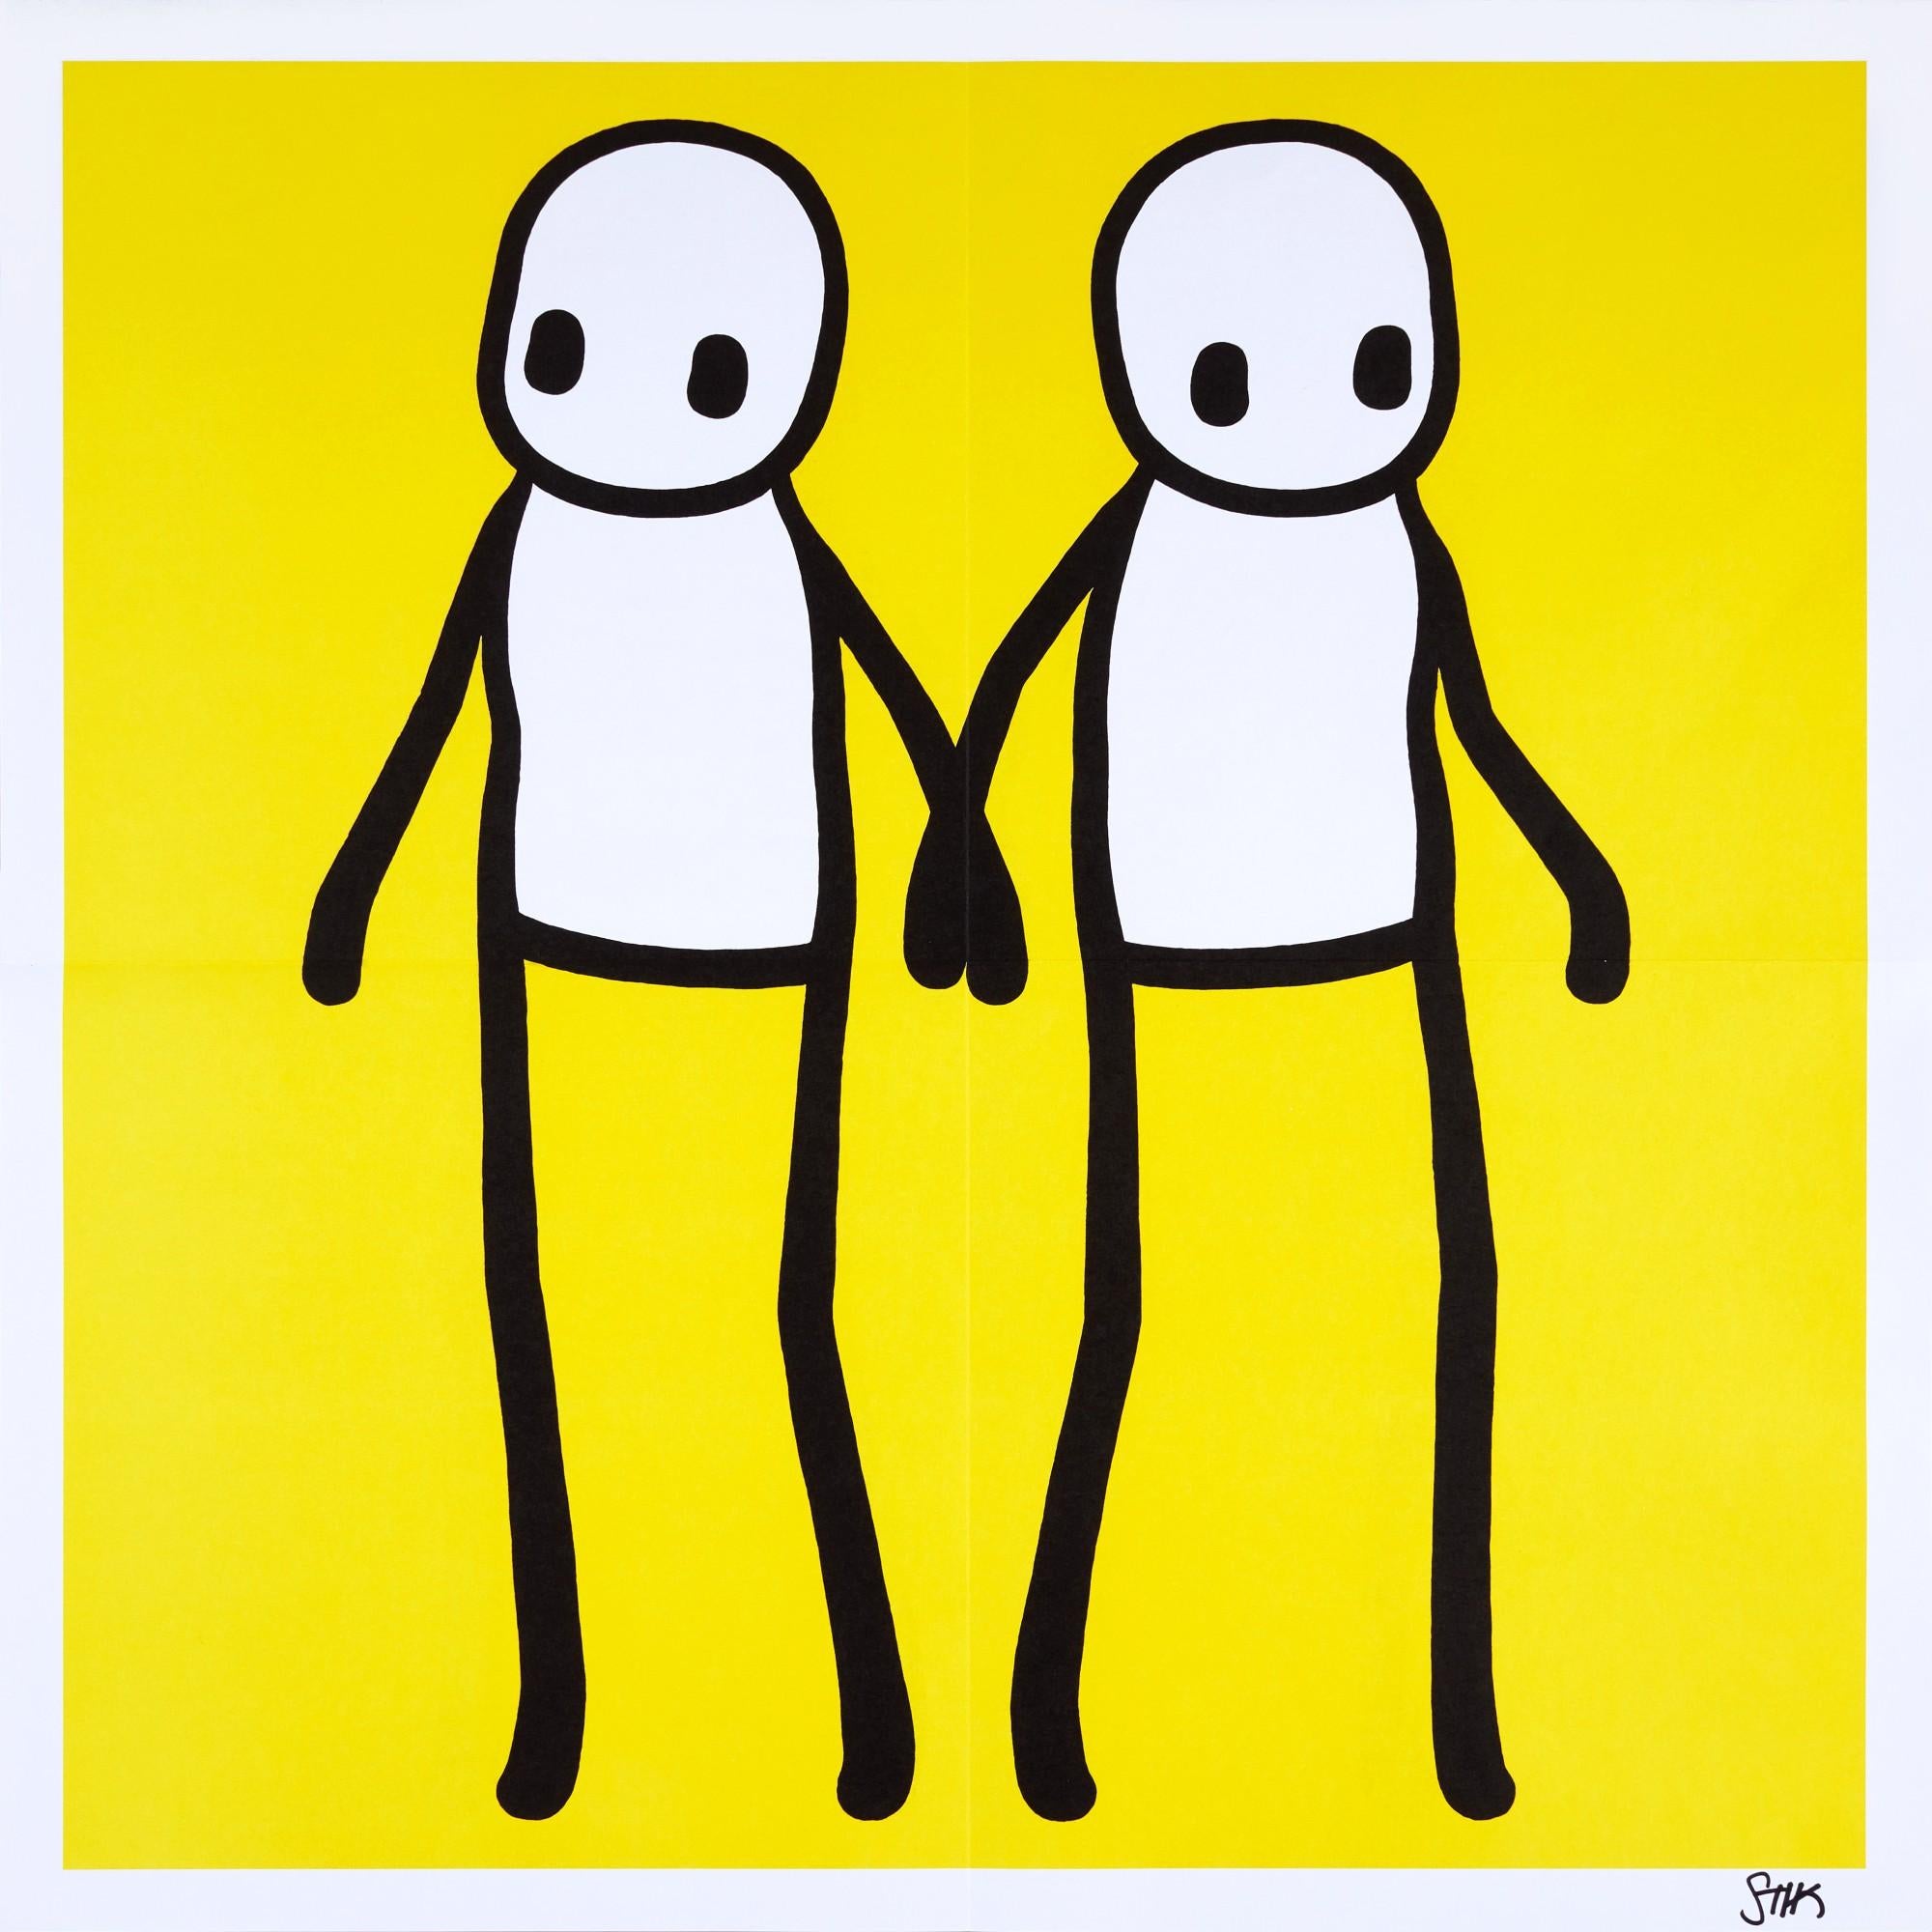 Holding Hands (Red, Orange, Yellow, Blue & Teal)

2020

50 x 50 cm

The complete set comprises five lithographs printed in colours.
Each is hand-signed by the artist in black felt-tip pen on wove paper.

Certificate of authenticity by